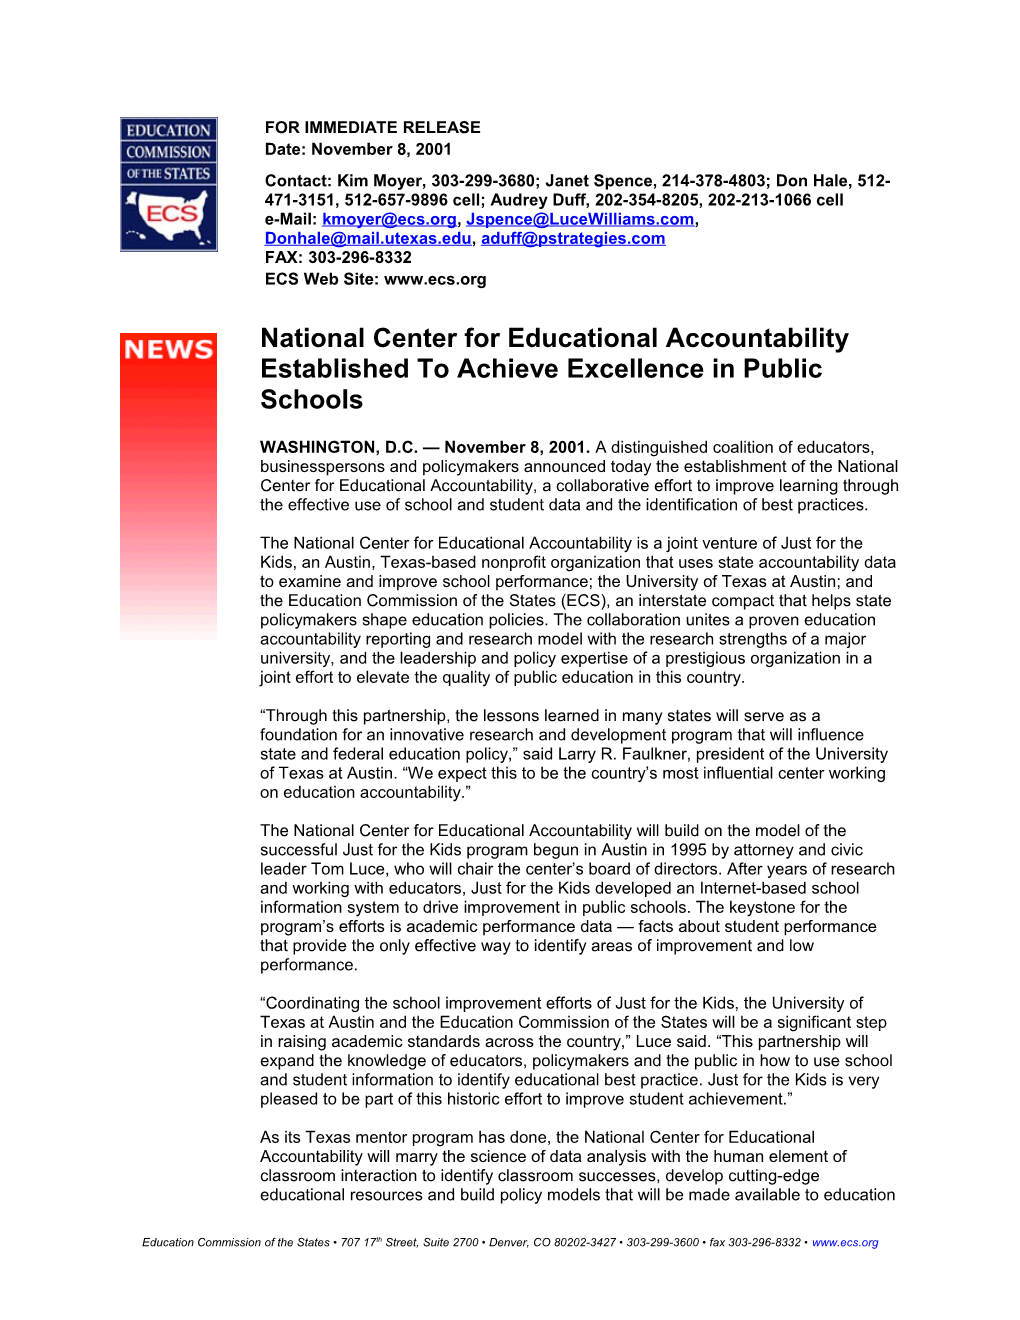 National Center for Educational Accountability Established to Achieve Excellence in Public